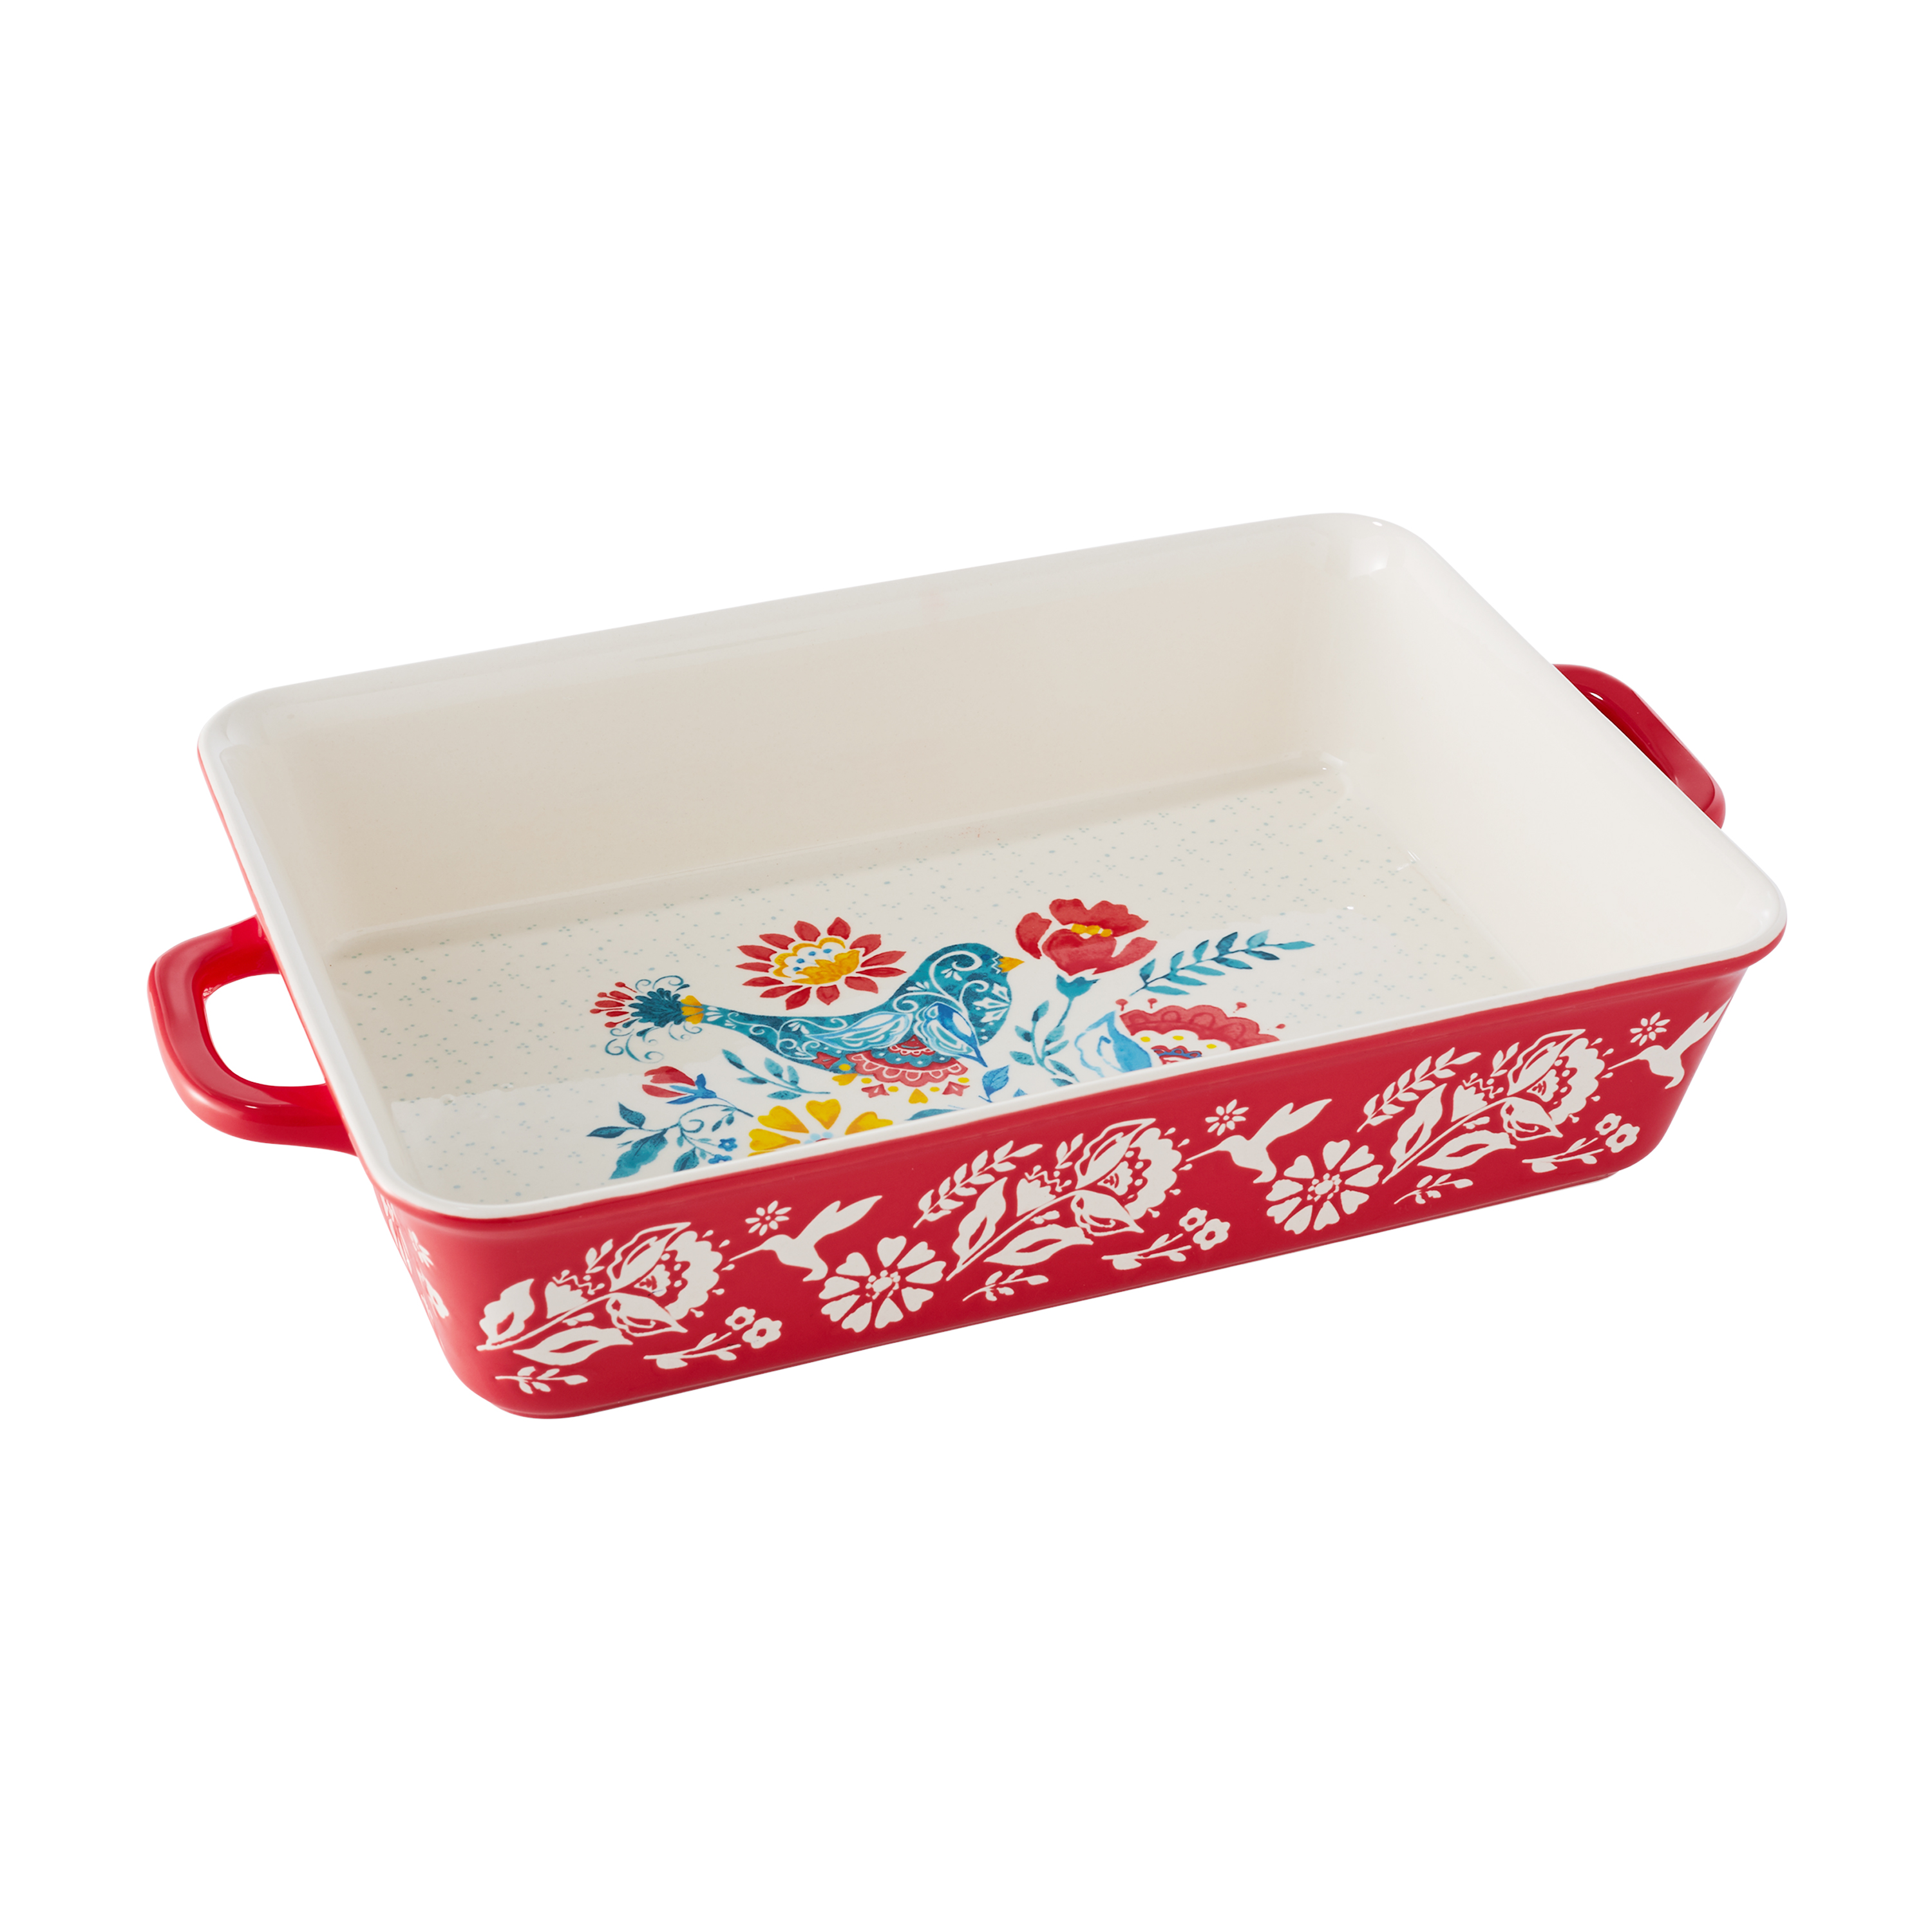 The Pioneer Woman Sweet Romance Blossoms Red, Teal 2-Piece Rectangular Ceramic Baking Dish - image 3 of 11